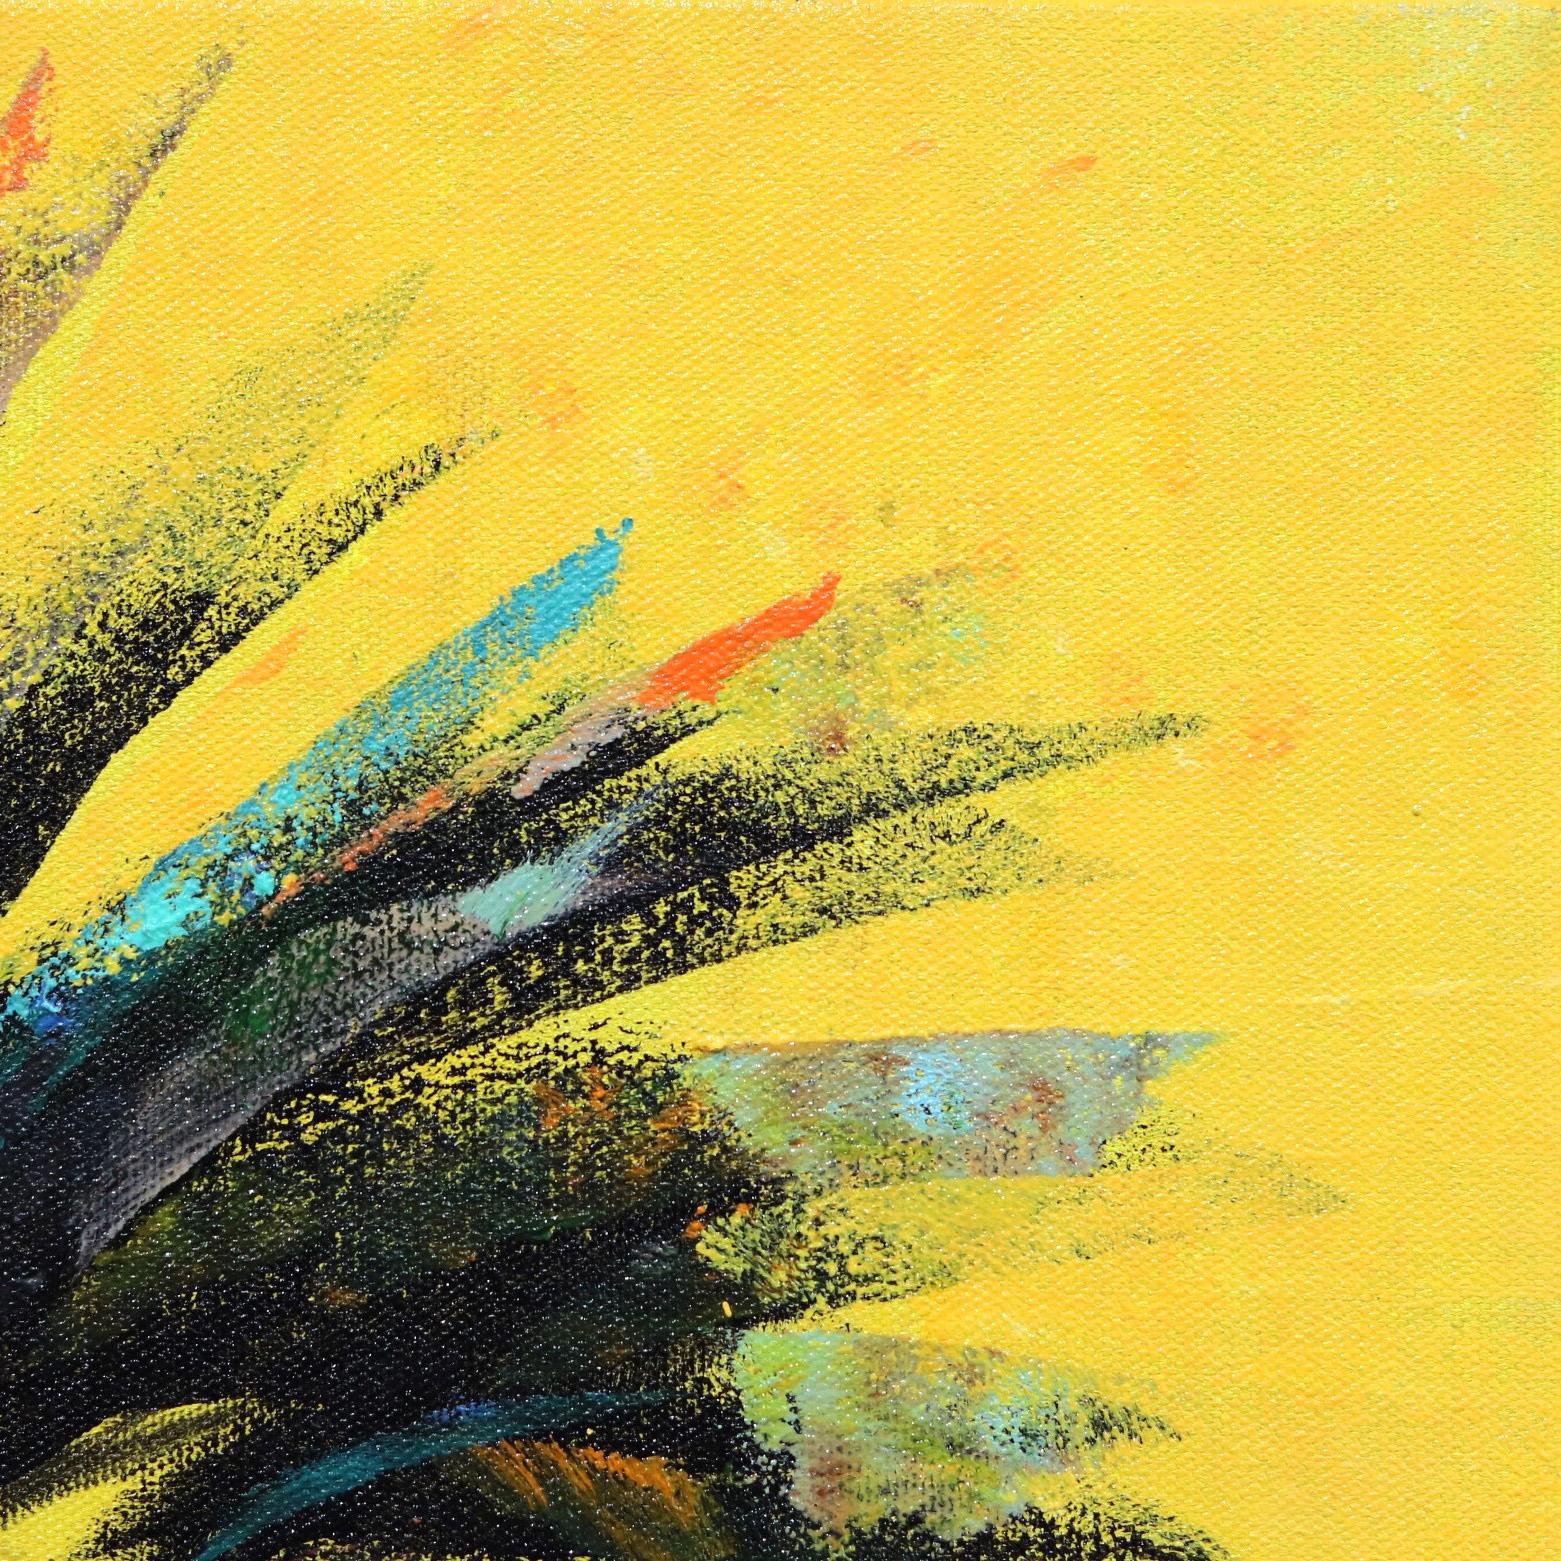 Yellow Dream - Original Palm Tree on Yellow Sky Landscape Painting For Sale 1